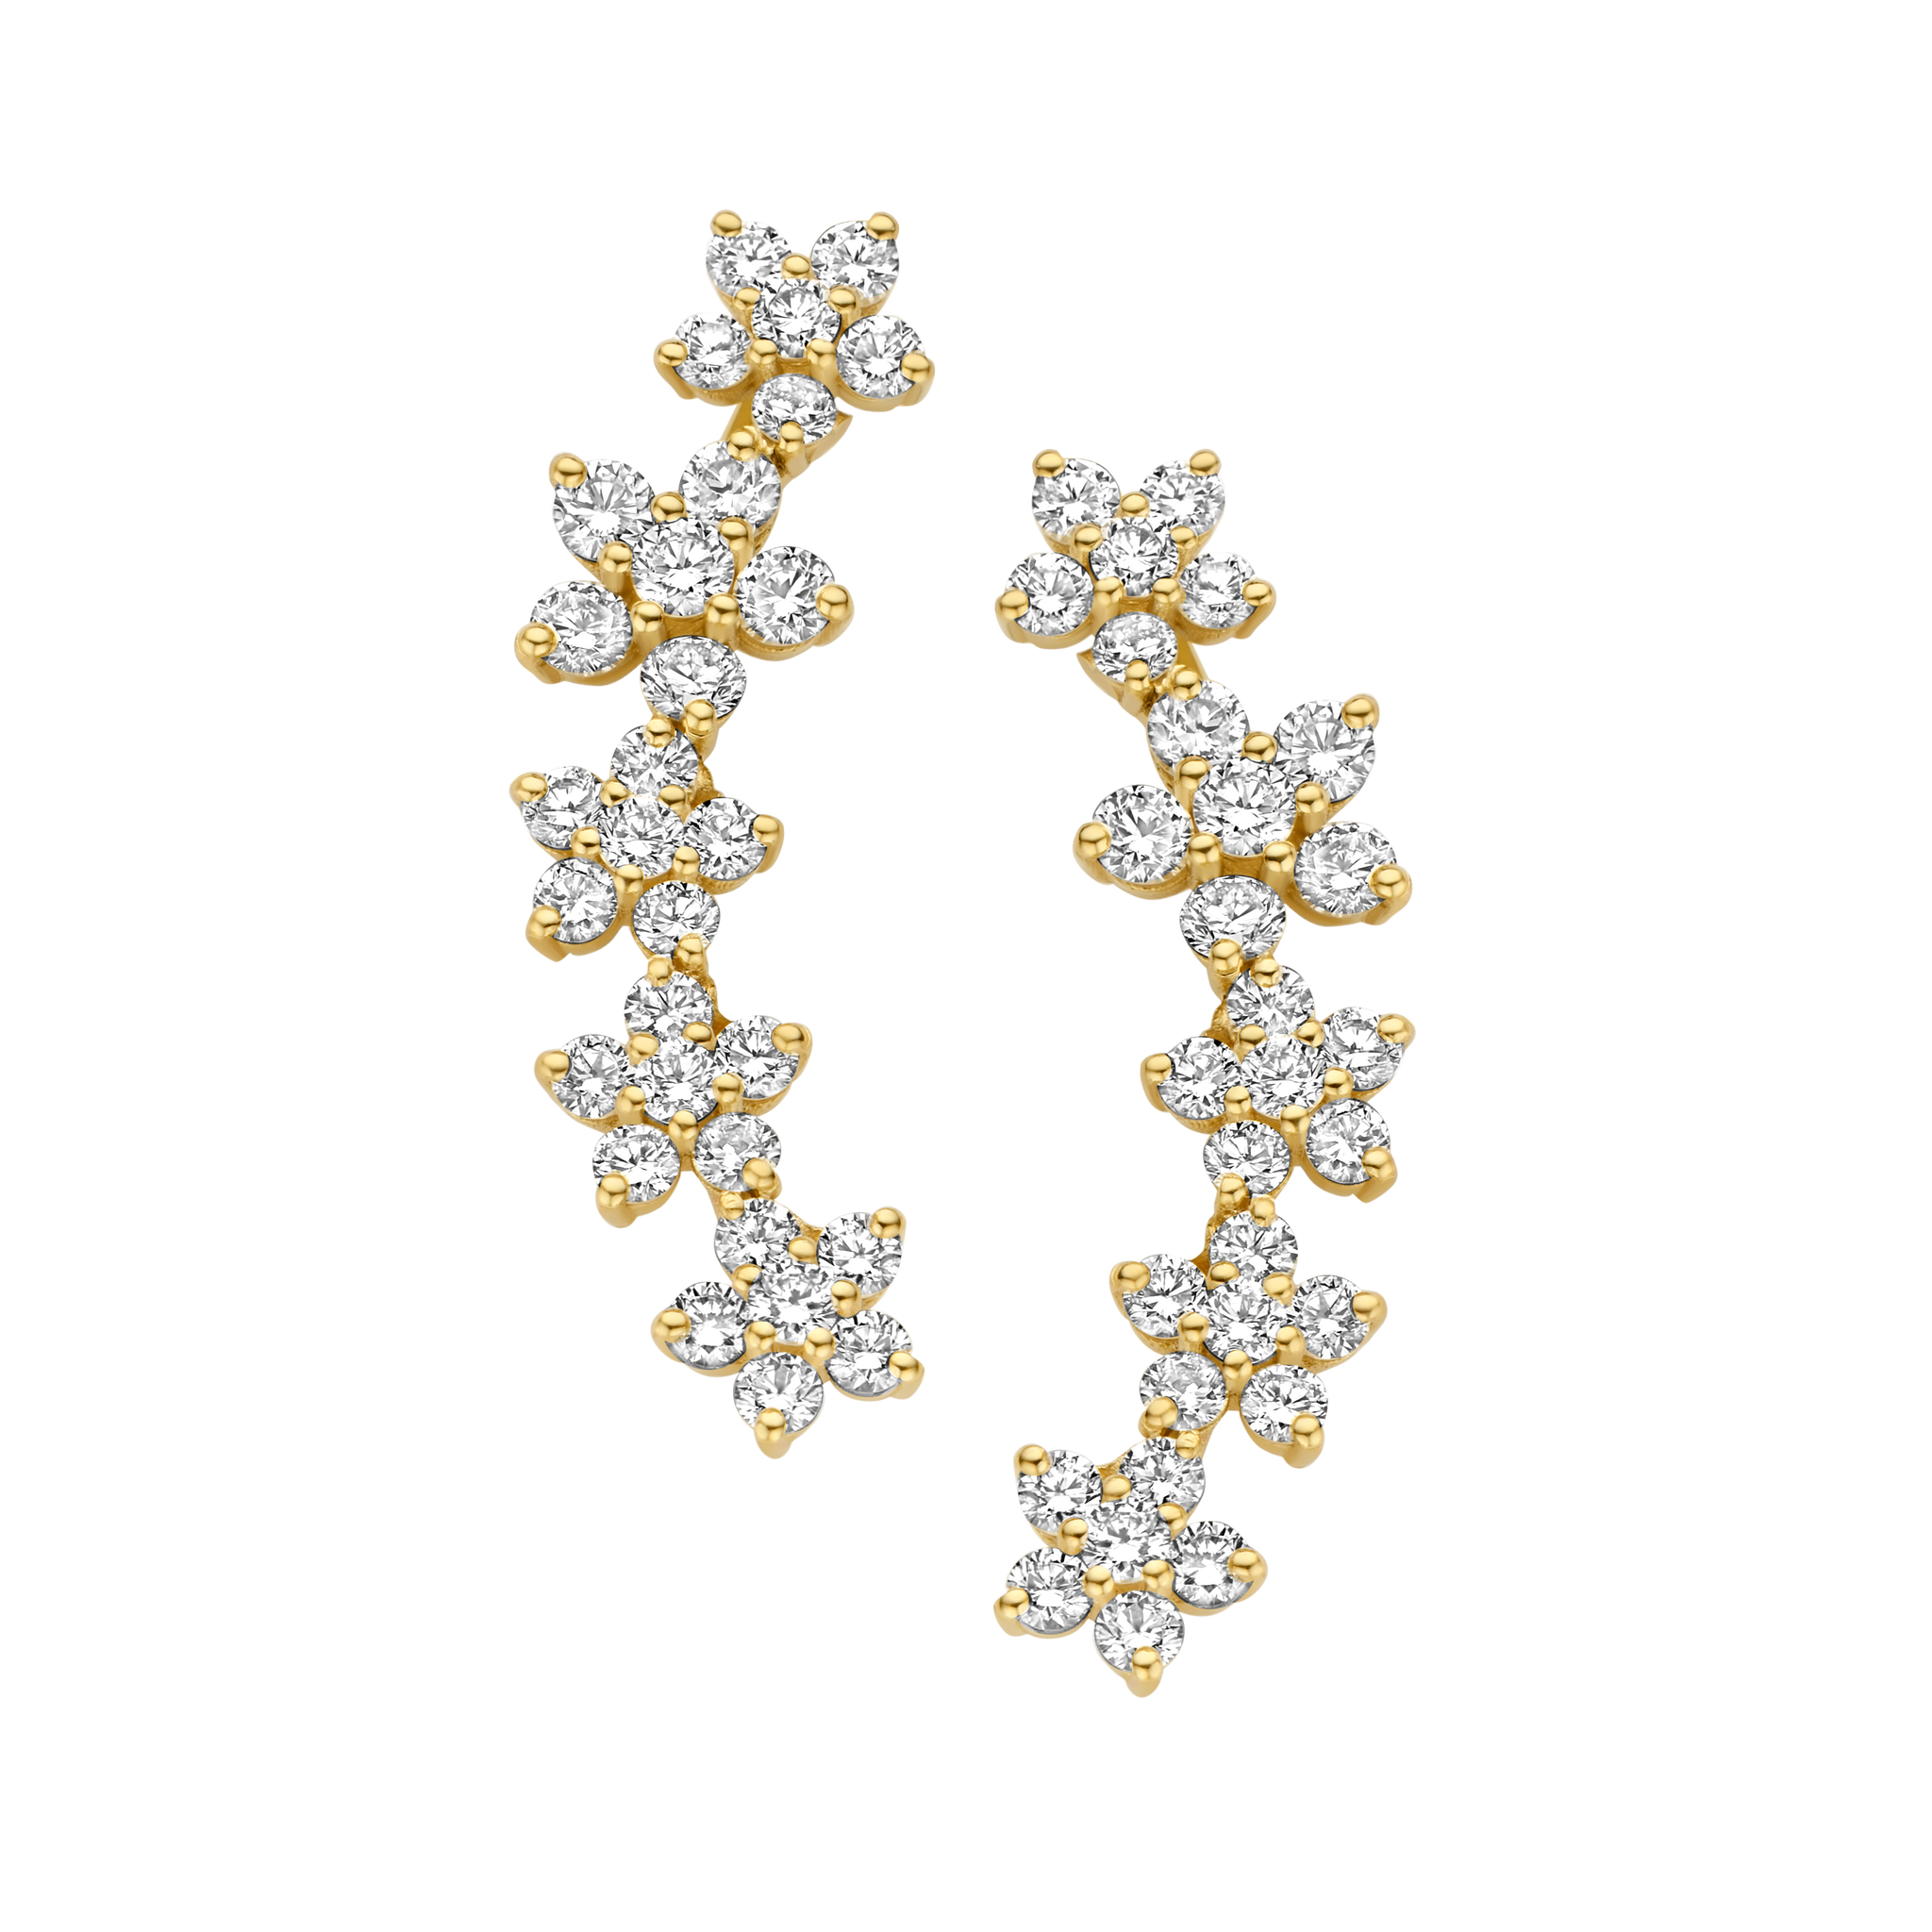 These Fleurs Sur L’oreille earrings feature 6.4 grams of illustrious 18k gold - Yellow Gold shown here. The earrings construct a floral garland of 2.2 total carat weight of diamonds. Sold as a pair.